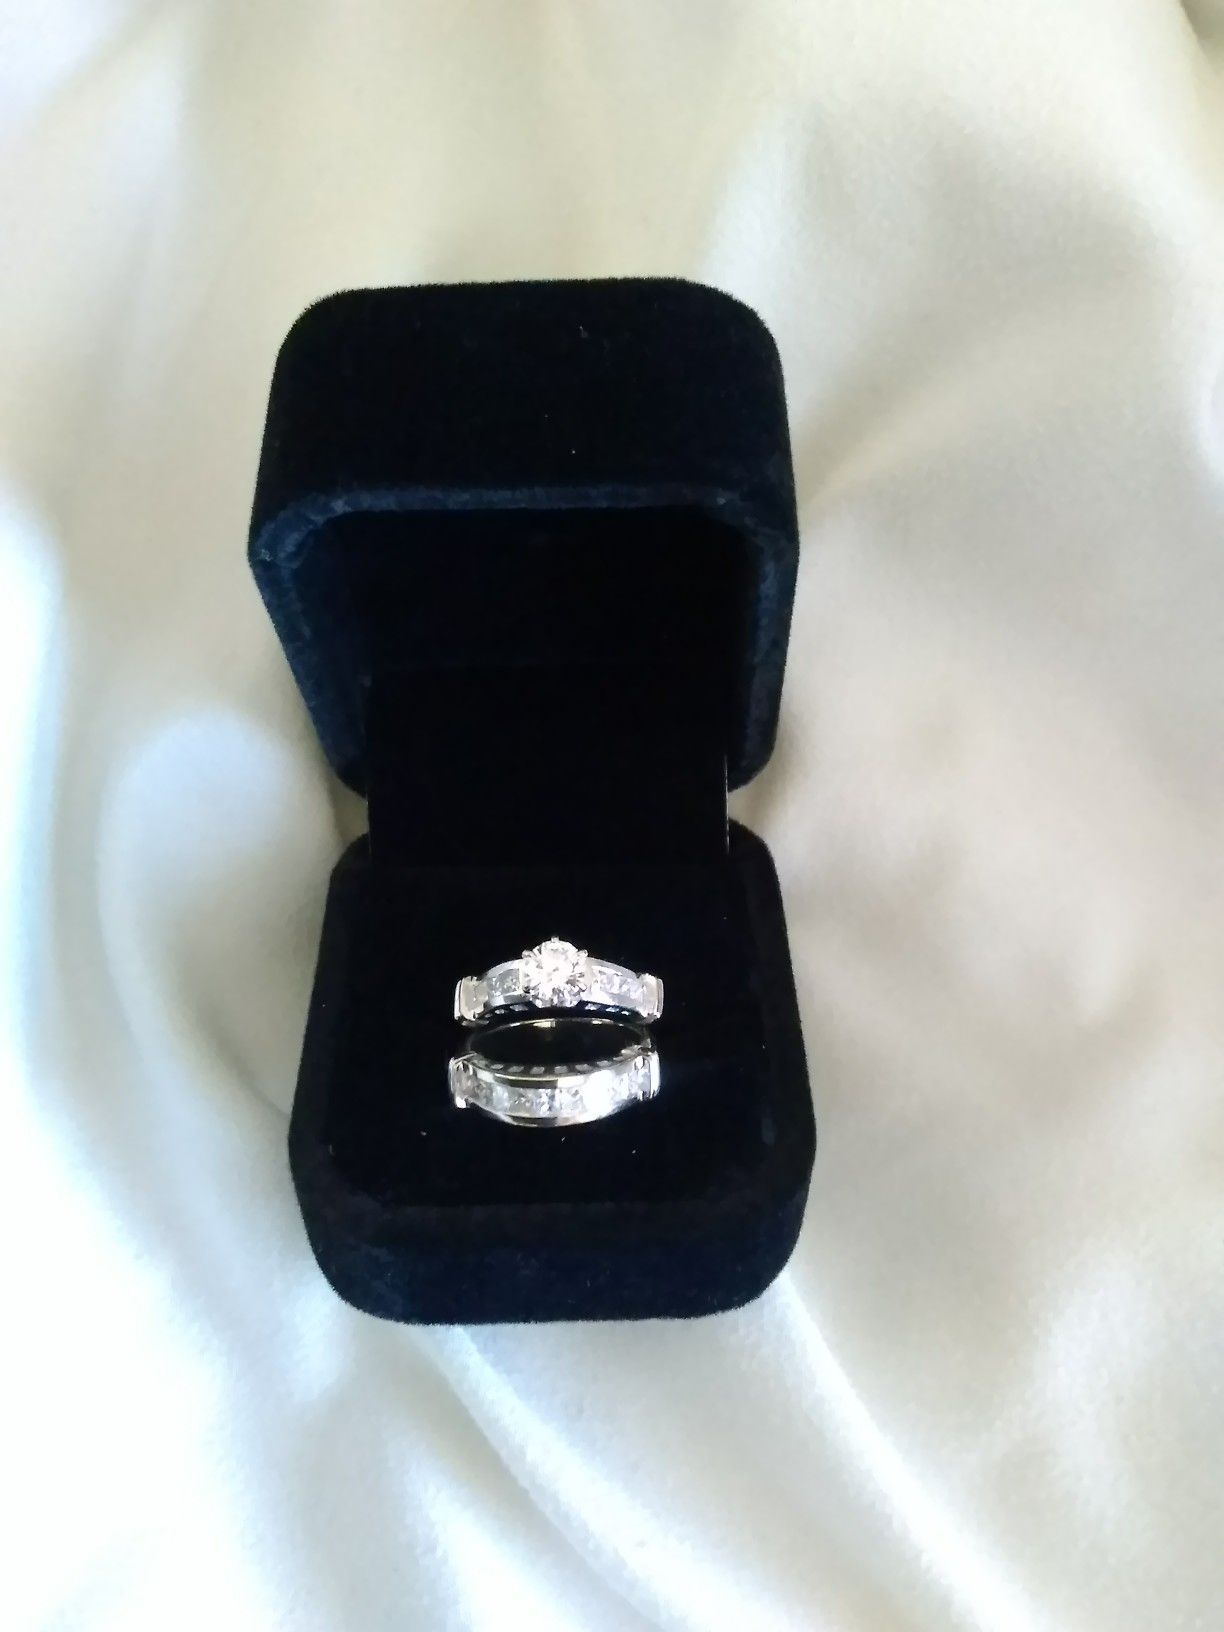 14k white gold diamond engagement and wedding ring,size 7, appraised at over $7000.00